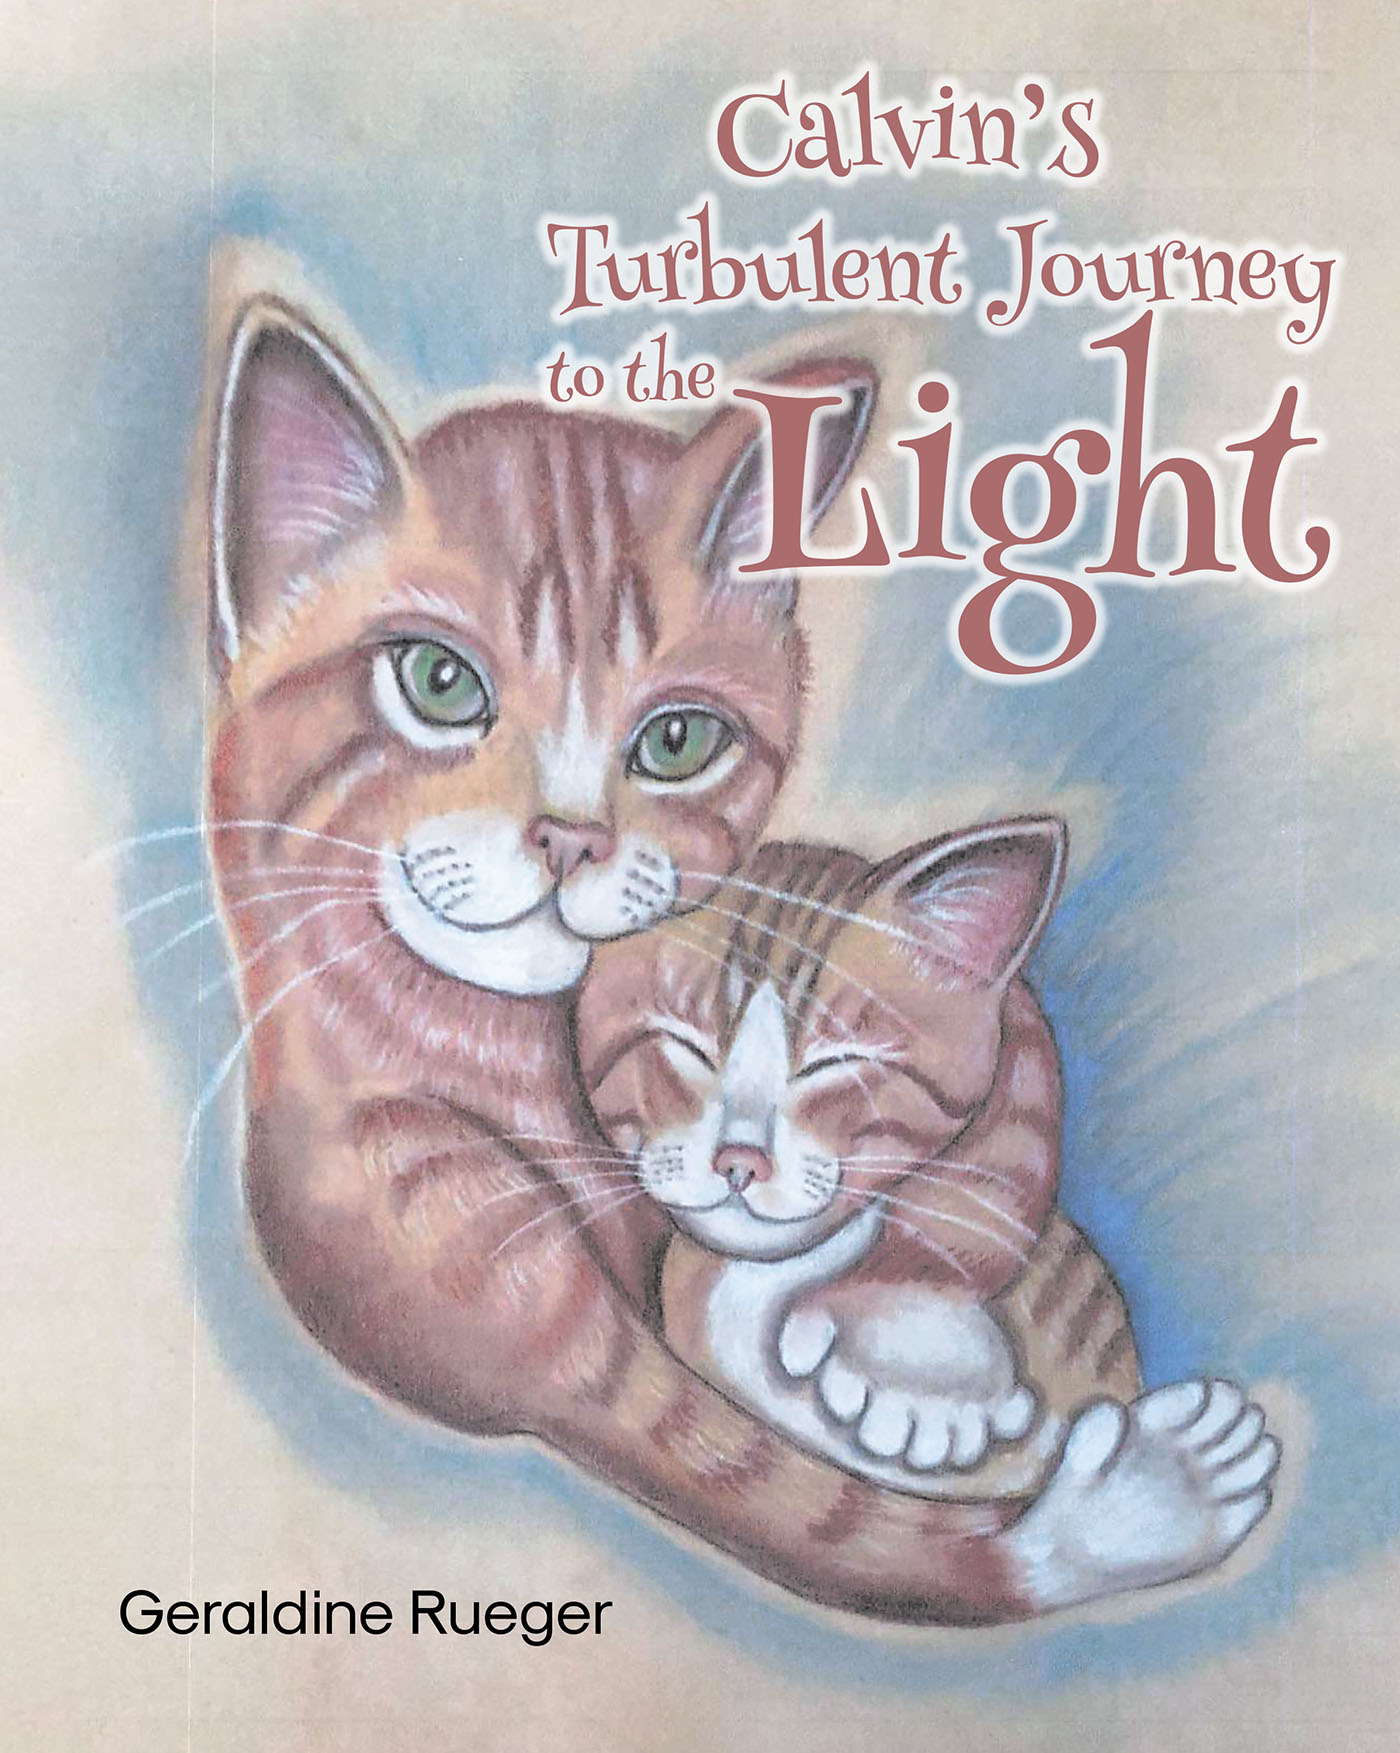 Geraldine Rueger’s Newly Released "Calvin’s Turbulent Journey to the Light" is a Warmhearted Tale of Discovering One’s Blessings